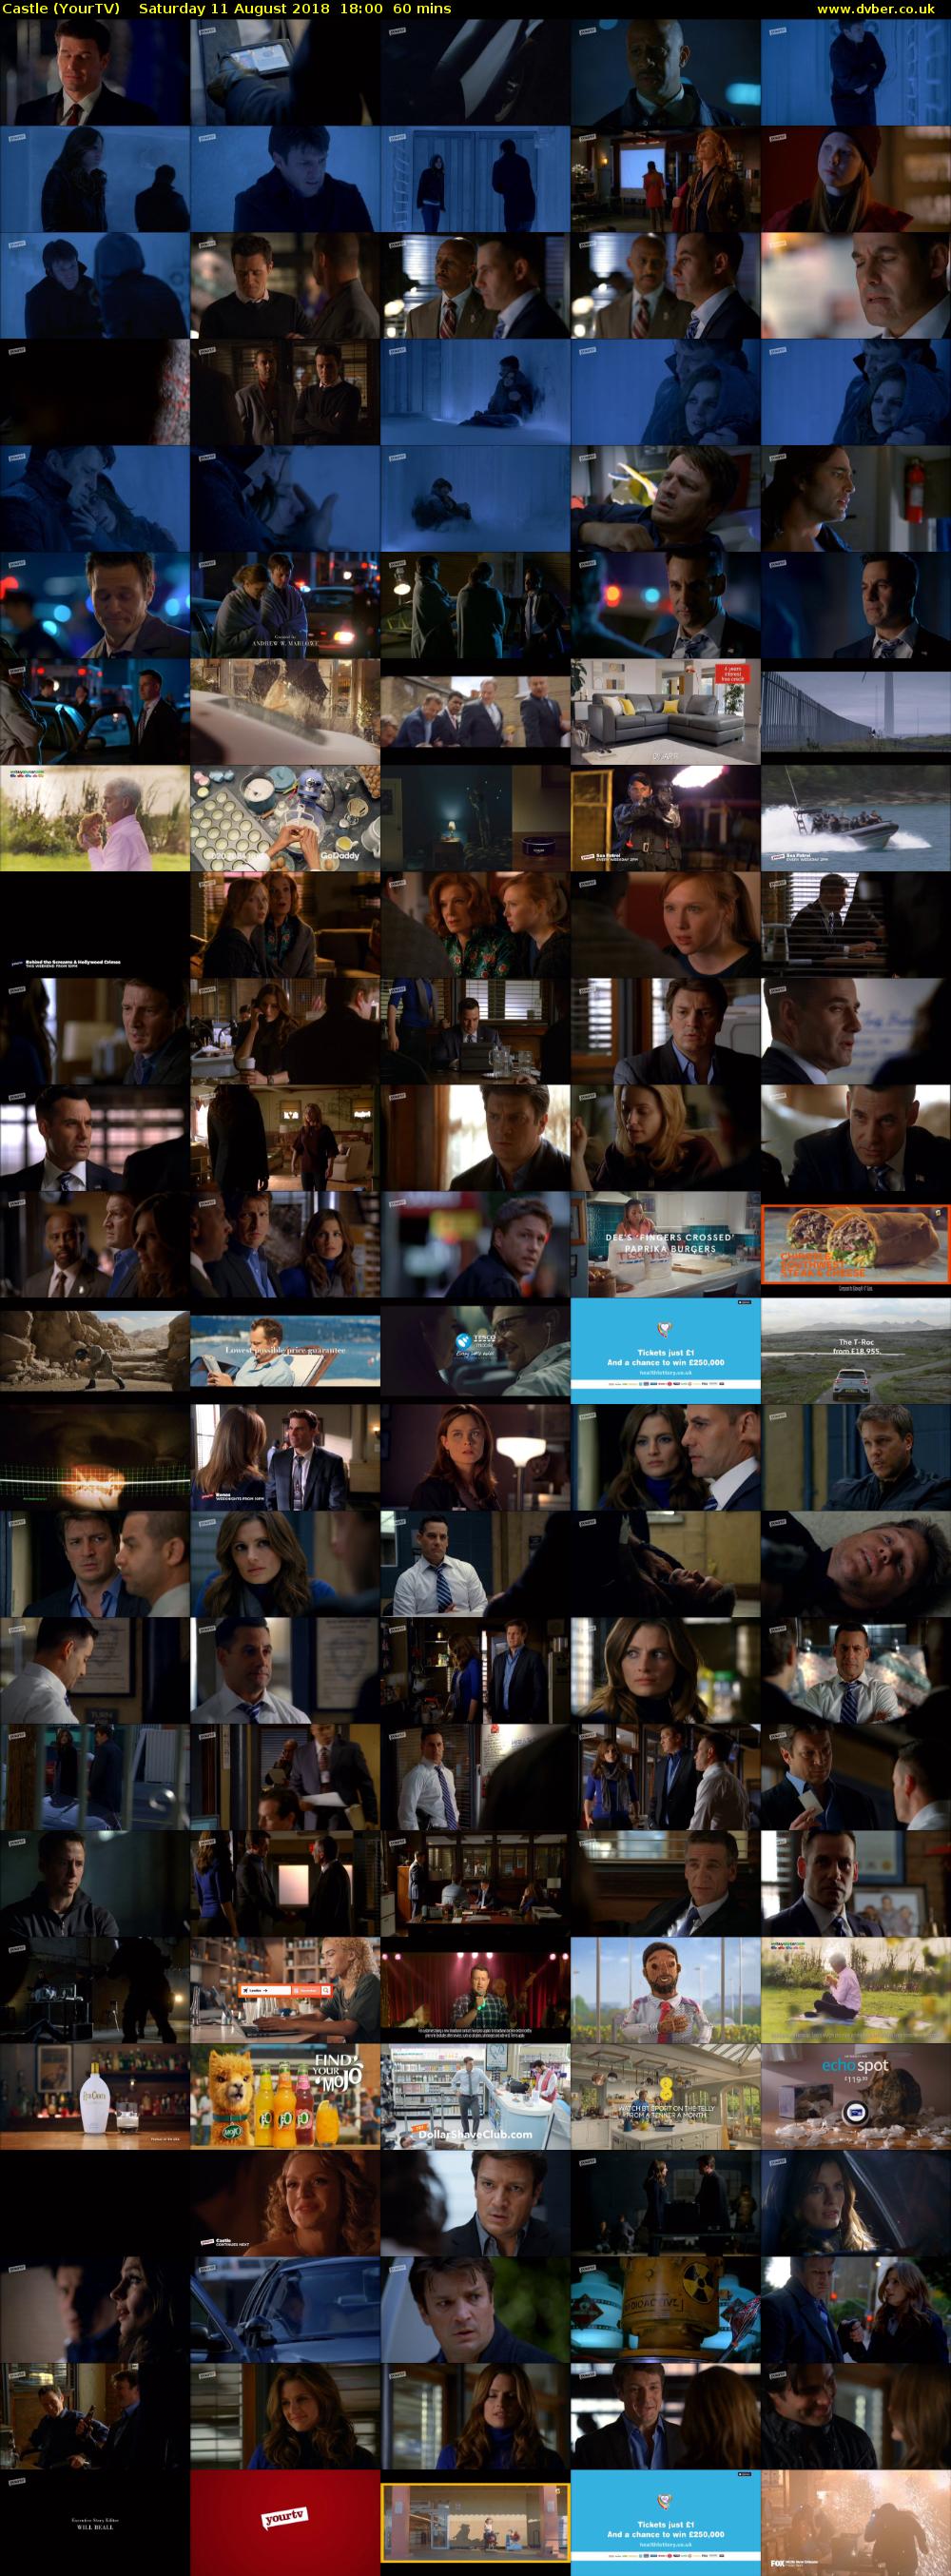 Castle (YourTV) Saturday 11 August 2018 18:00 - 19:00